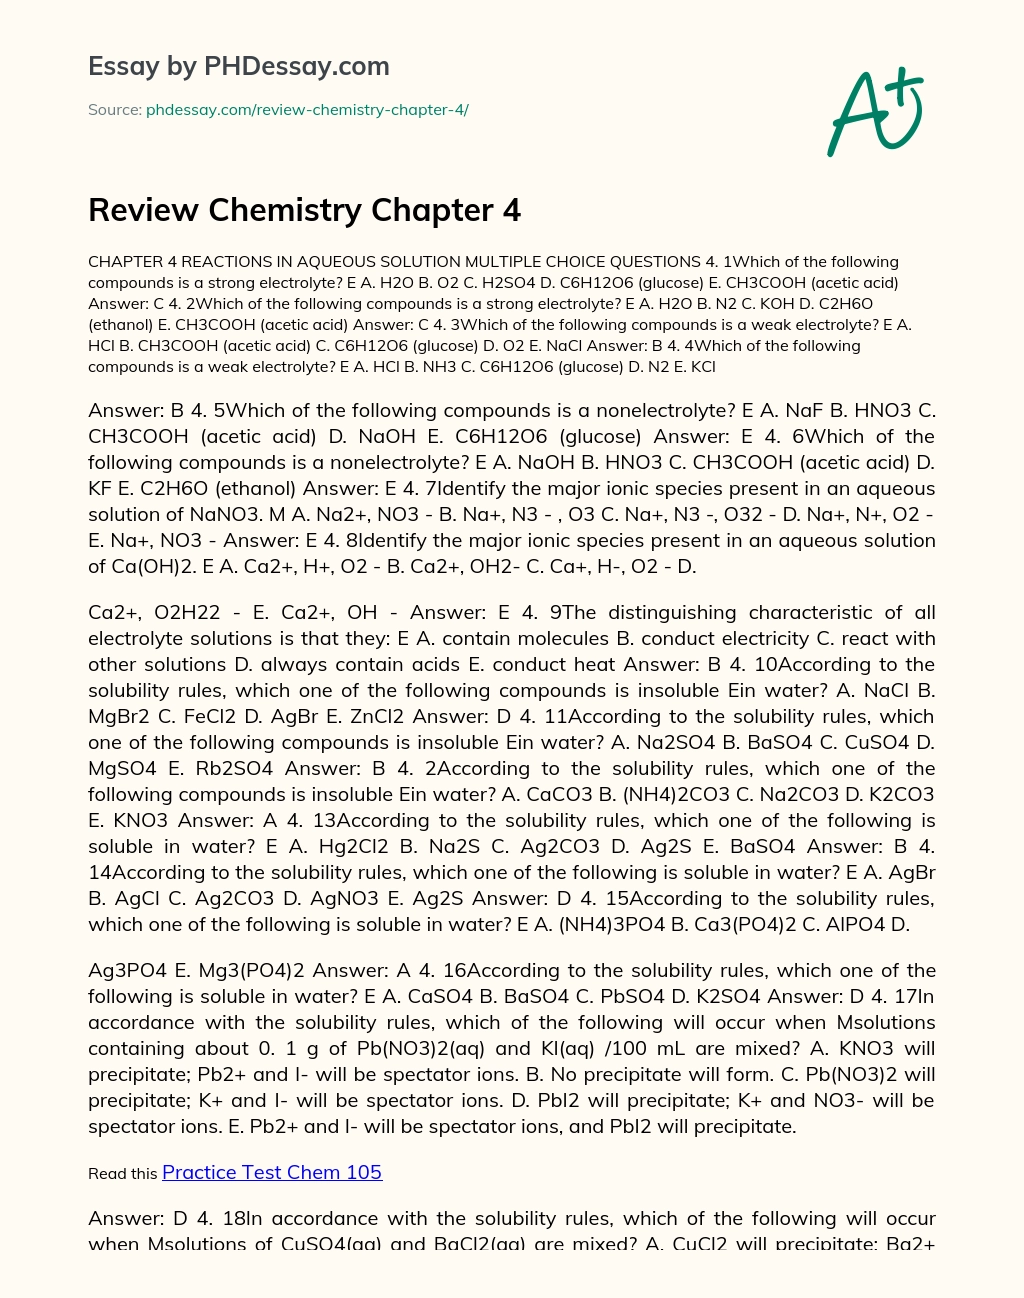 Review Chemistry Chapter 4 essay